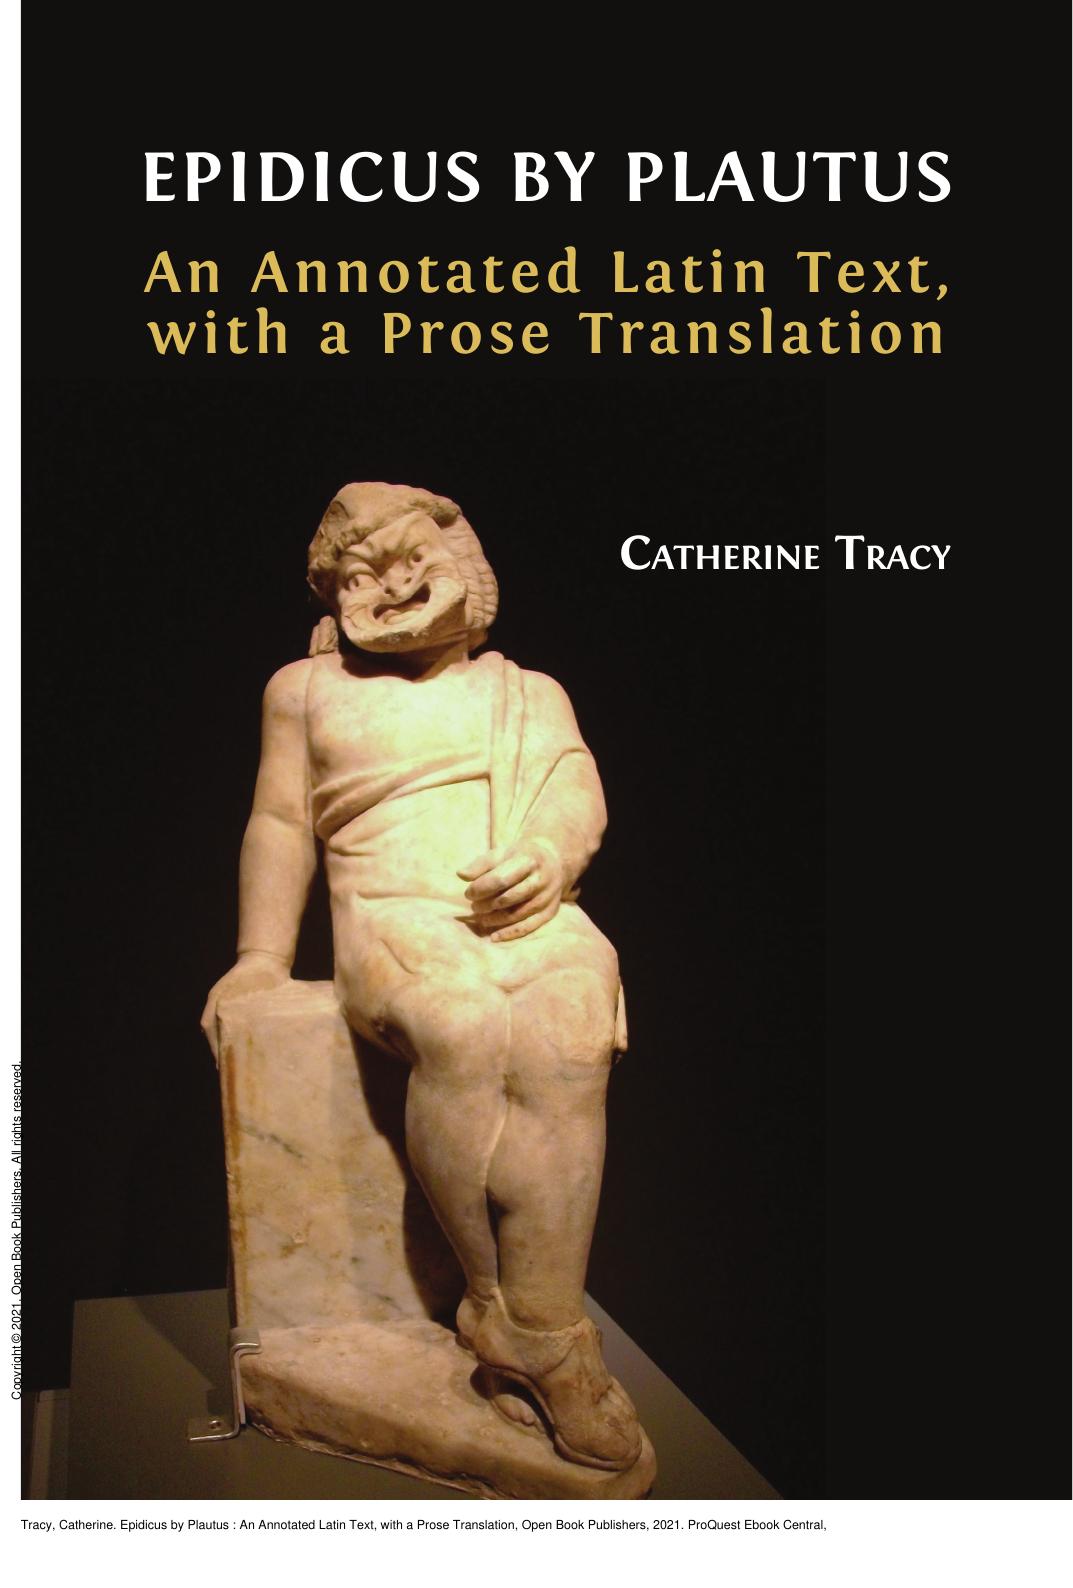 Epidicus by Plautus : An Annotated Latin Text, with a Prose Translation by Catherine Tracy